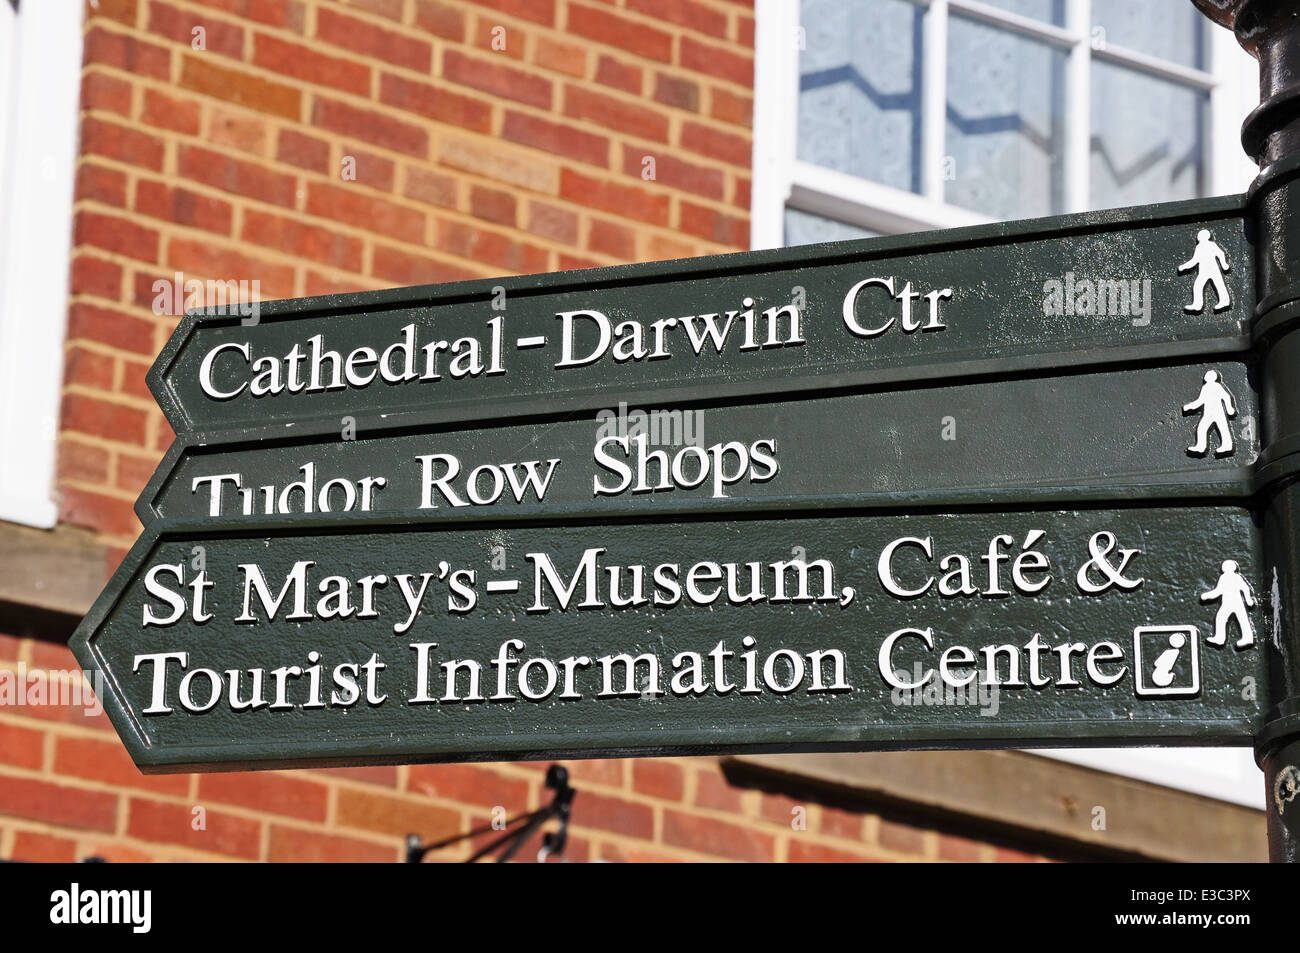 Places of interest sign, Lichfield, Staffordshire, England, UK, Western Europe. Stock Photo